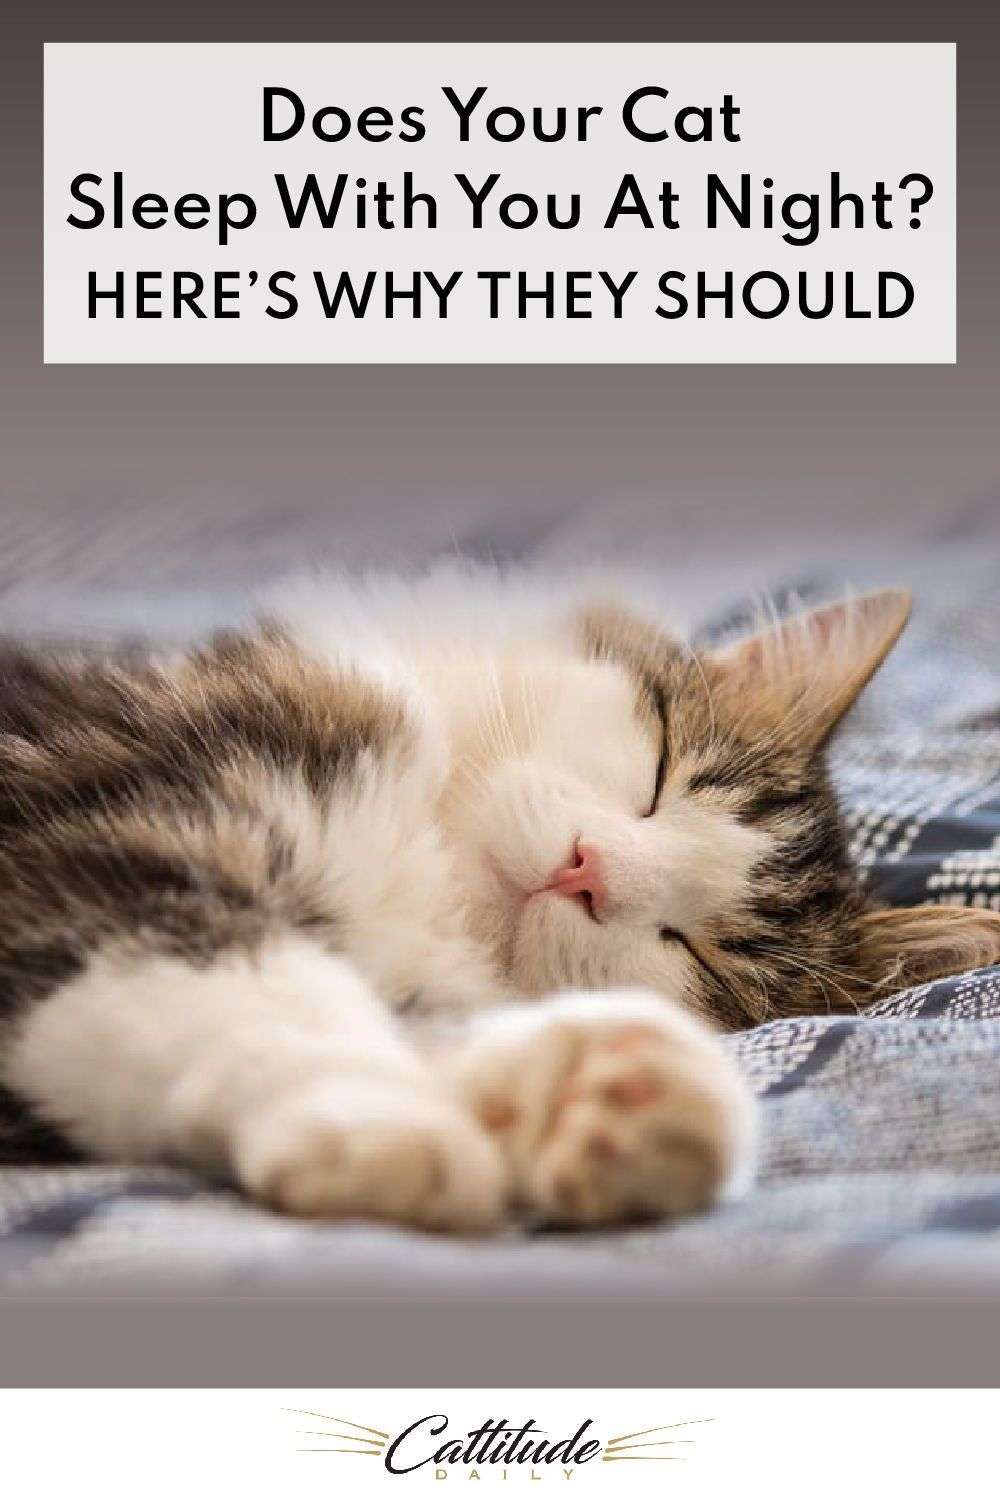 Does Your Cat Sleep With You? Here